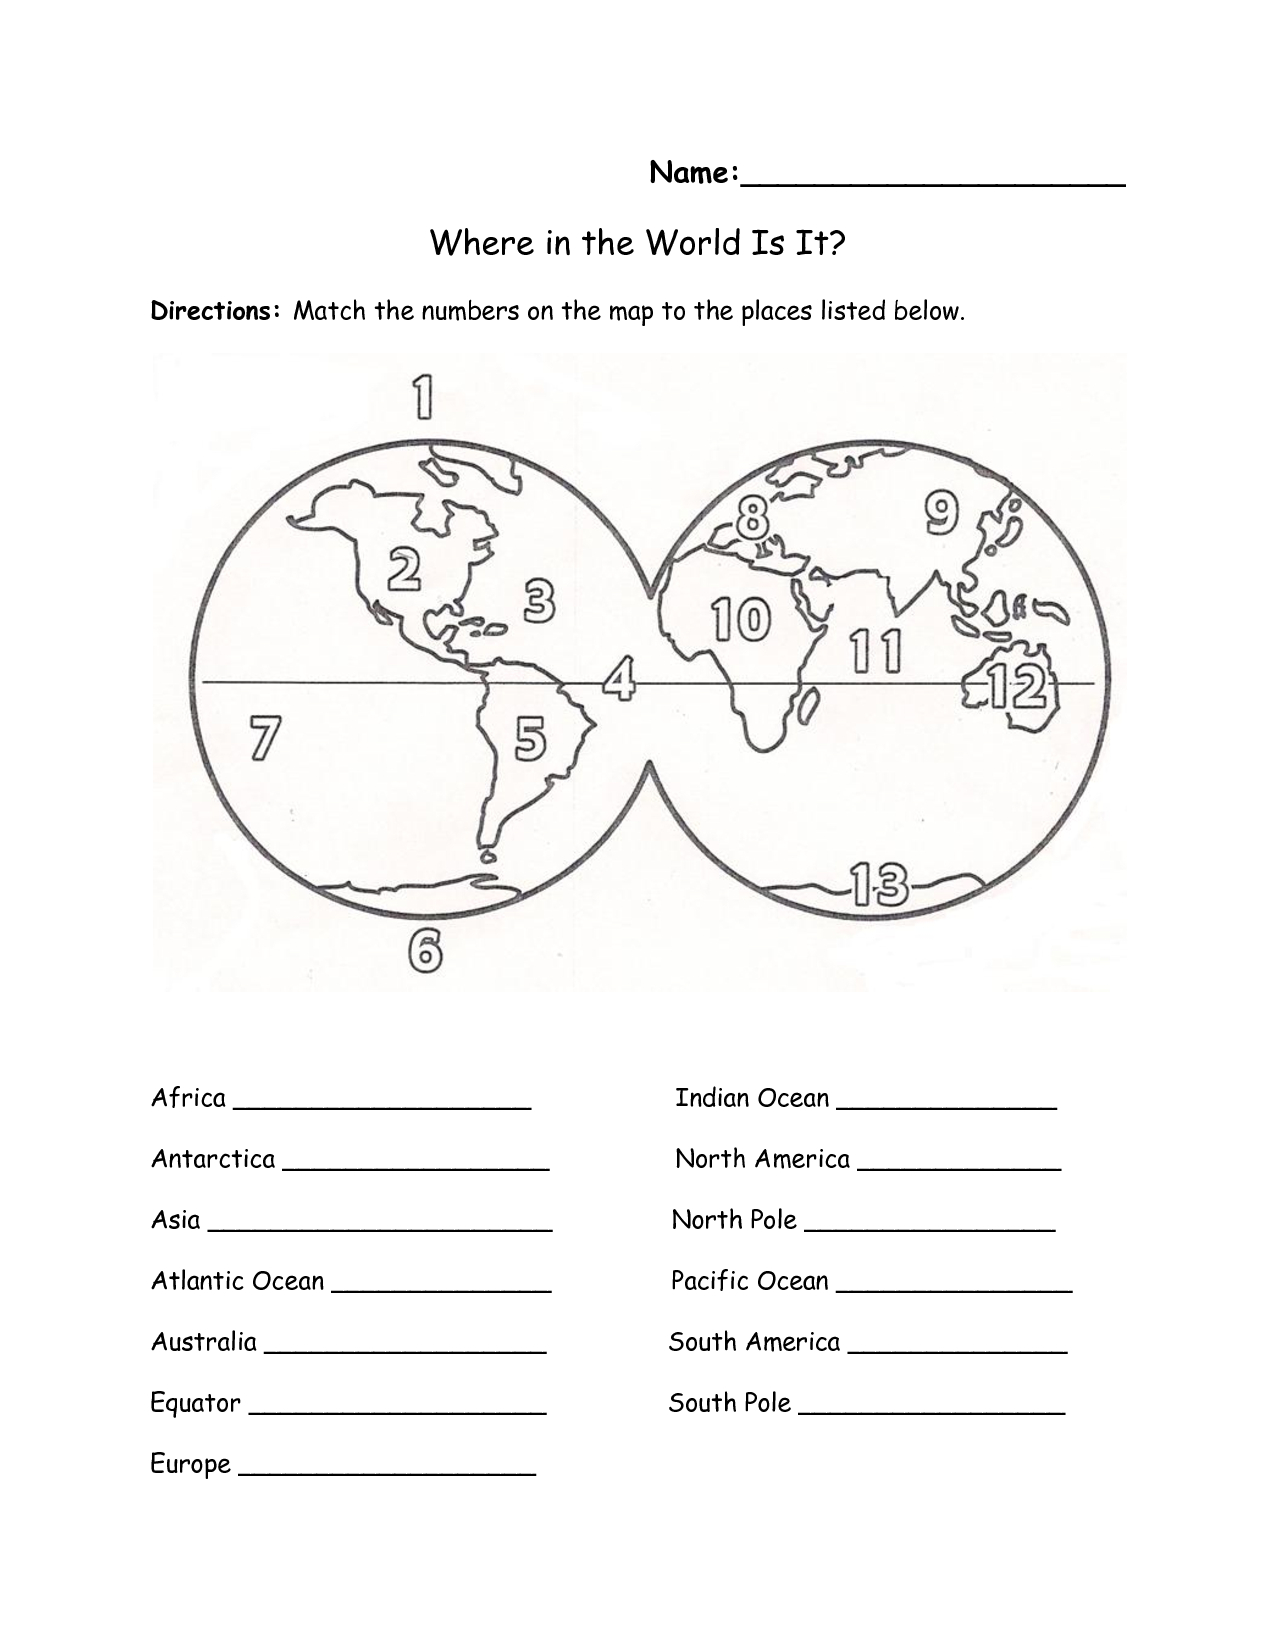 Printables Continents And Oceans Of The World Worksheet - Free Printable Map Of Continents And Oceans